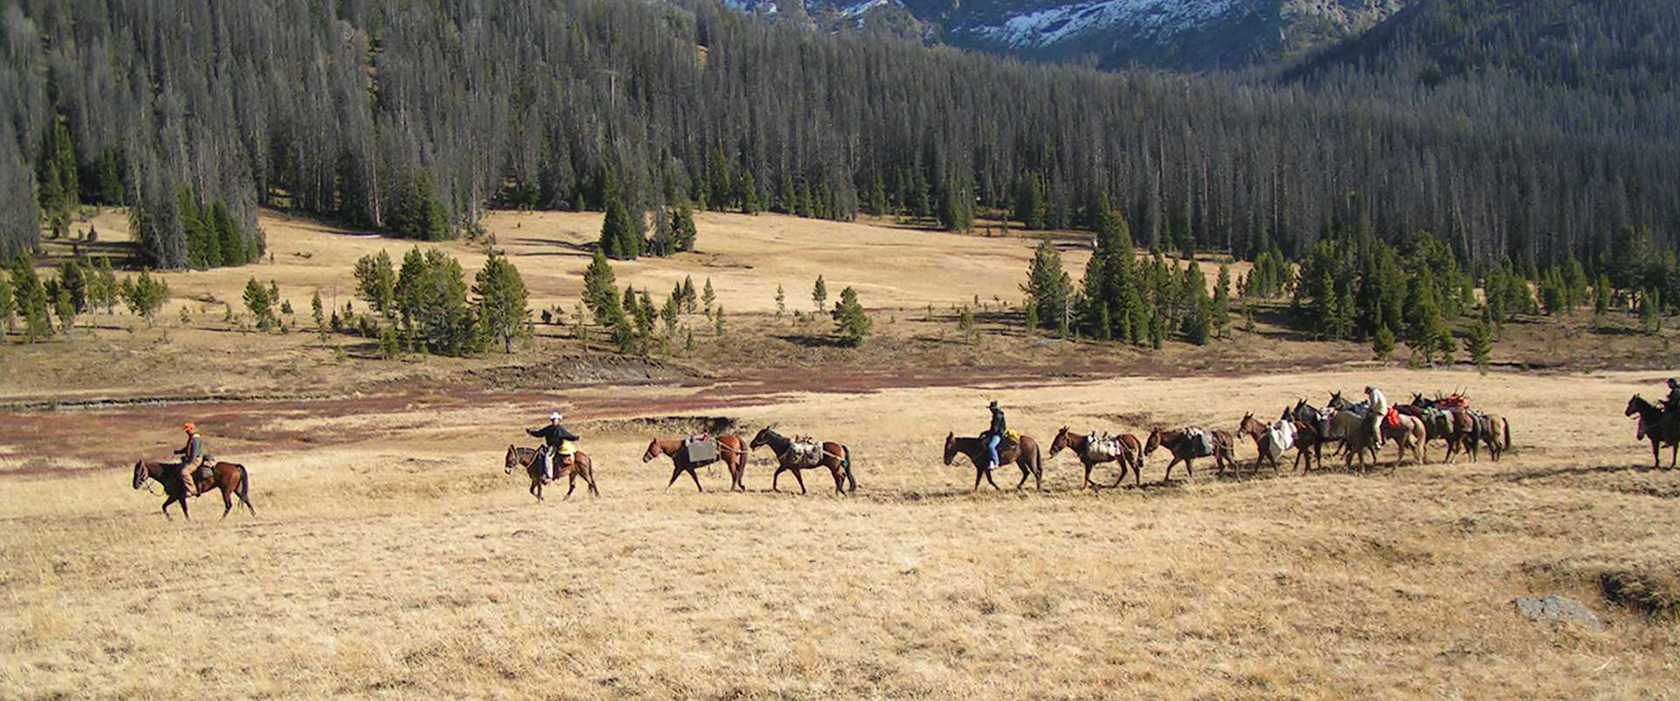 ranch real estate, cody WY/ranch real estate for sale in cody WY